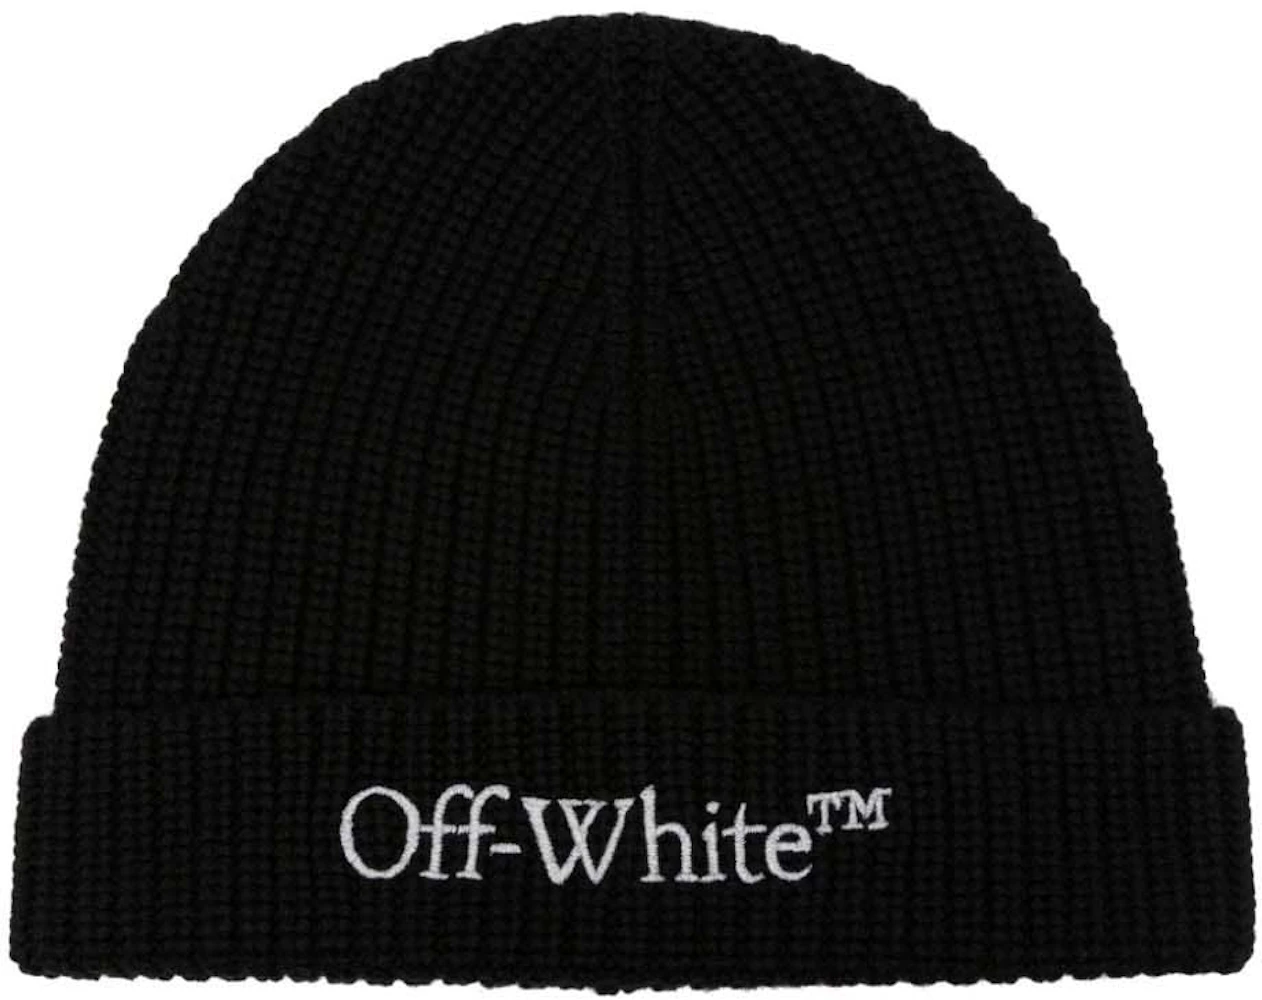 Off-White Bookish Classic Knit Beanie Black/White in Virgin Wool - US